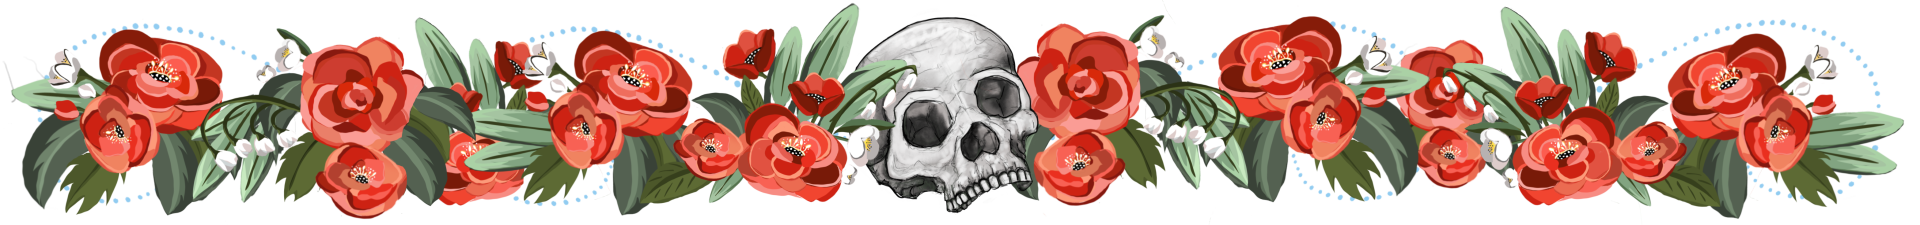 A row of red flowers with green leaves and a skull in the middle.